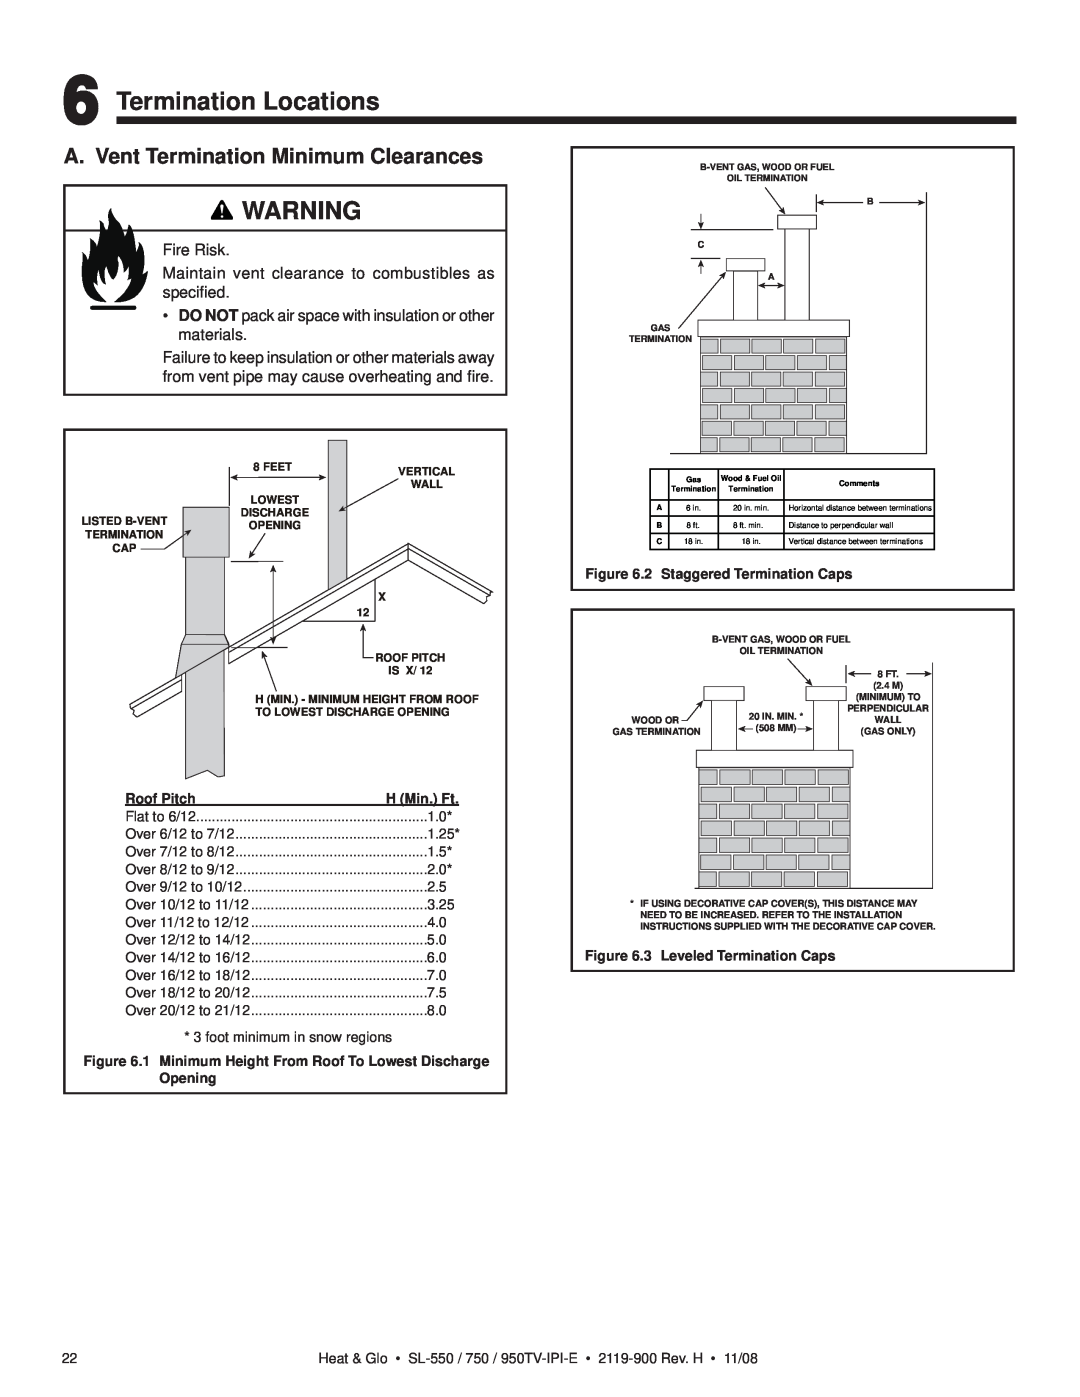 Hearth and Home Technologies SL-550TV-IPI-E Termination Locations, A. Vent Termination Minimum Clearances, Roof Pitch 